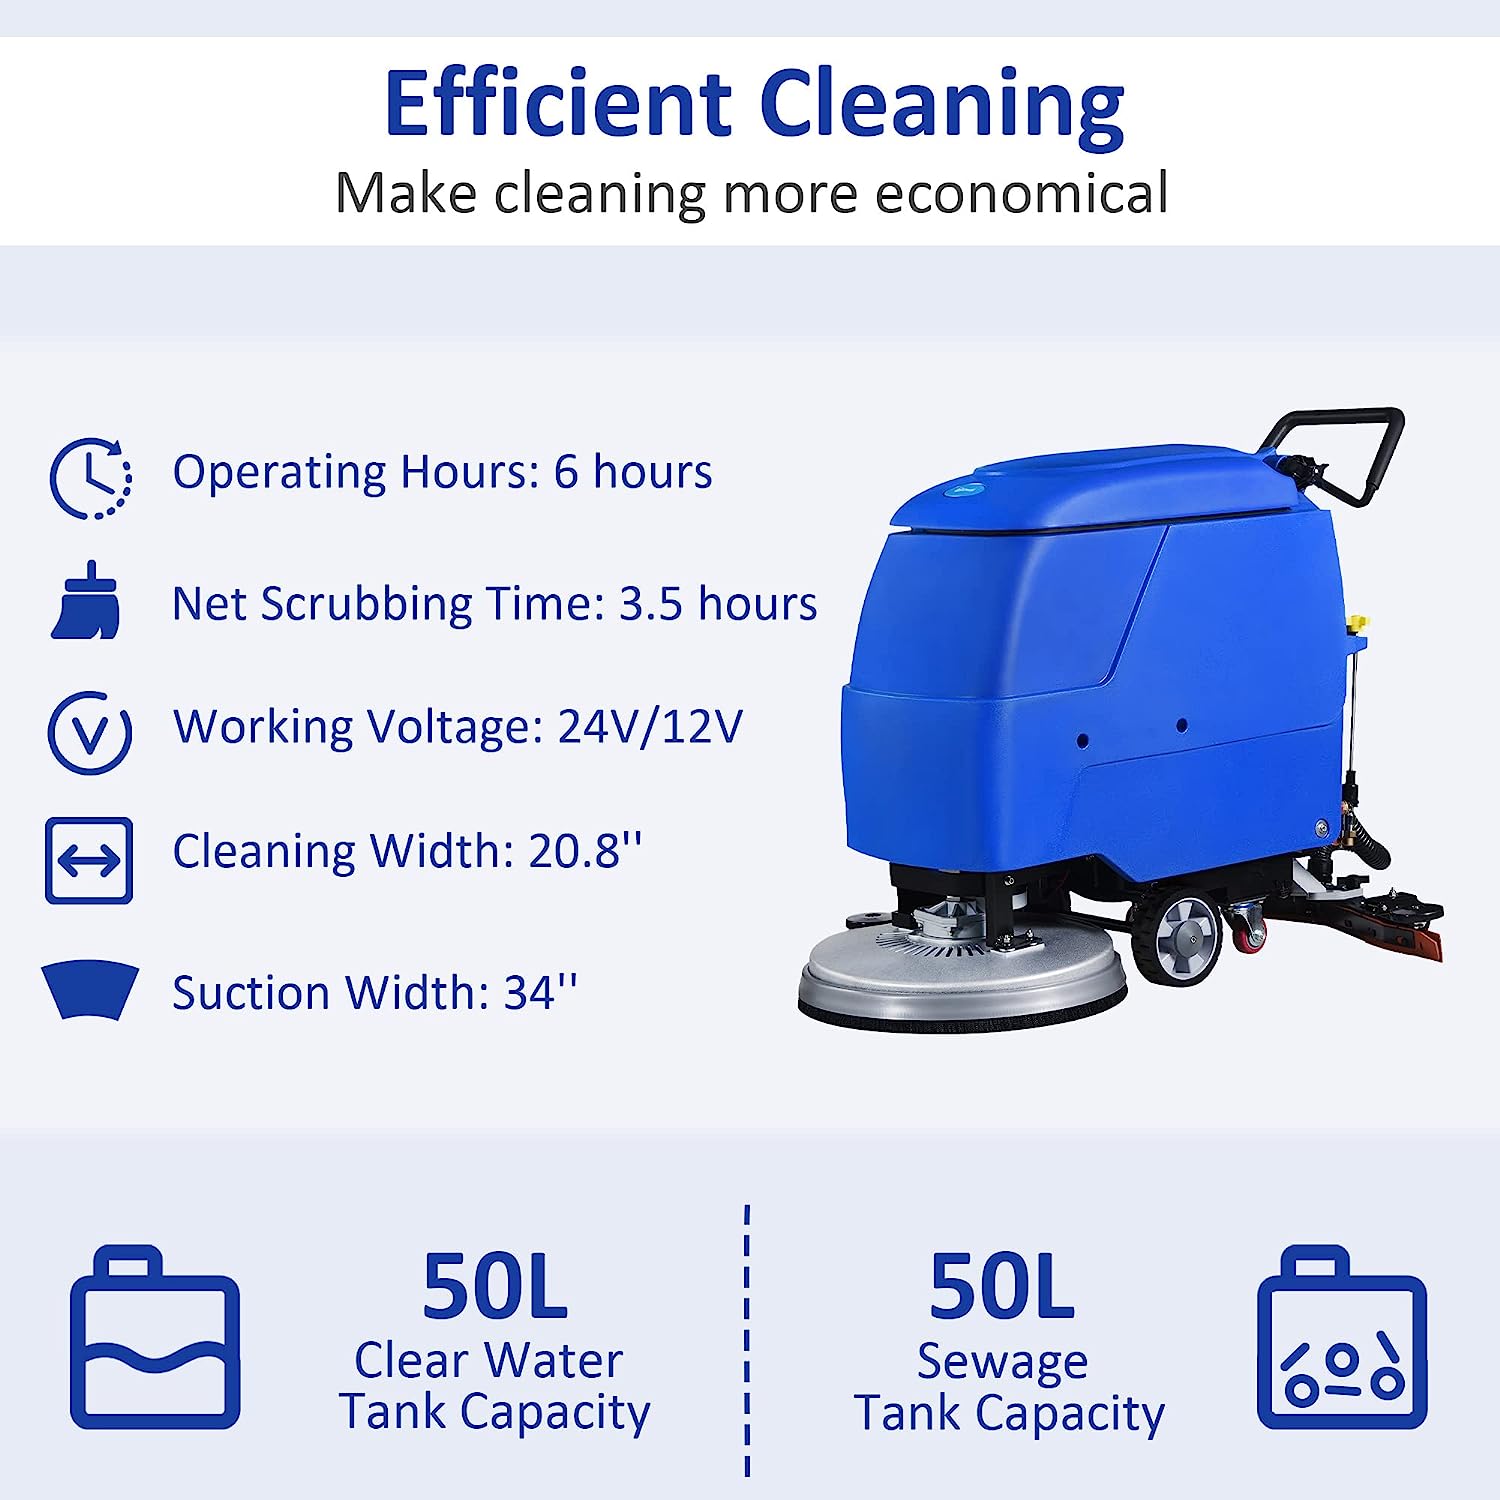 E-Macht Commercial Electric Floor Scrubber/ Dryer with Adjustable Handle with 20.8" Cleaning Path and 2 x 100amh Batteries for Efficient Cleaning